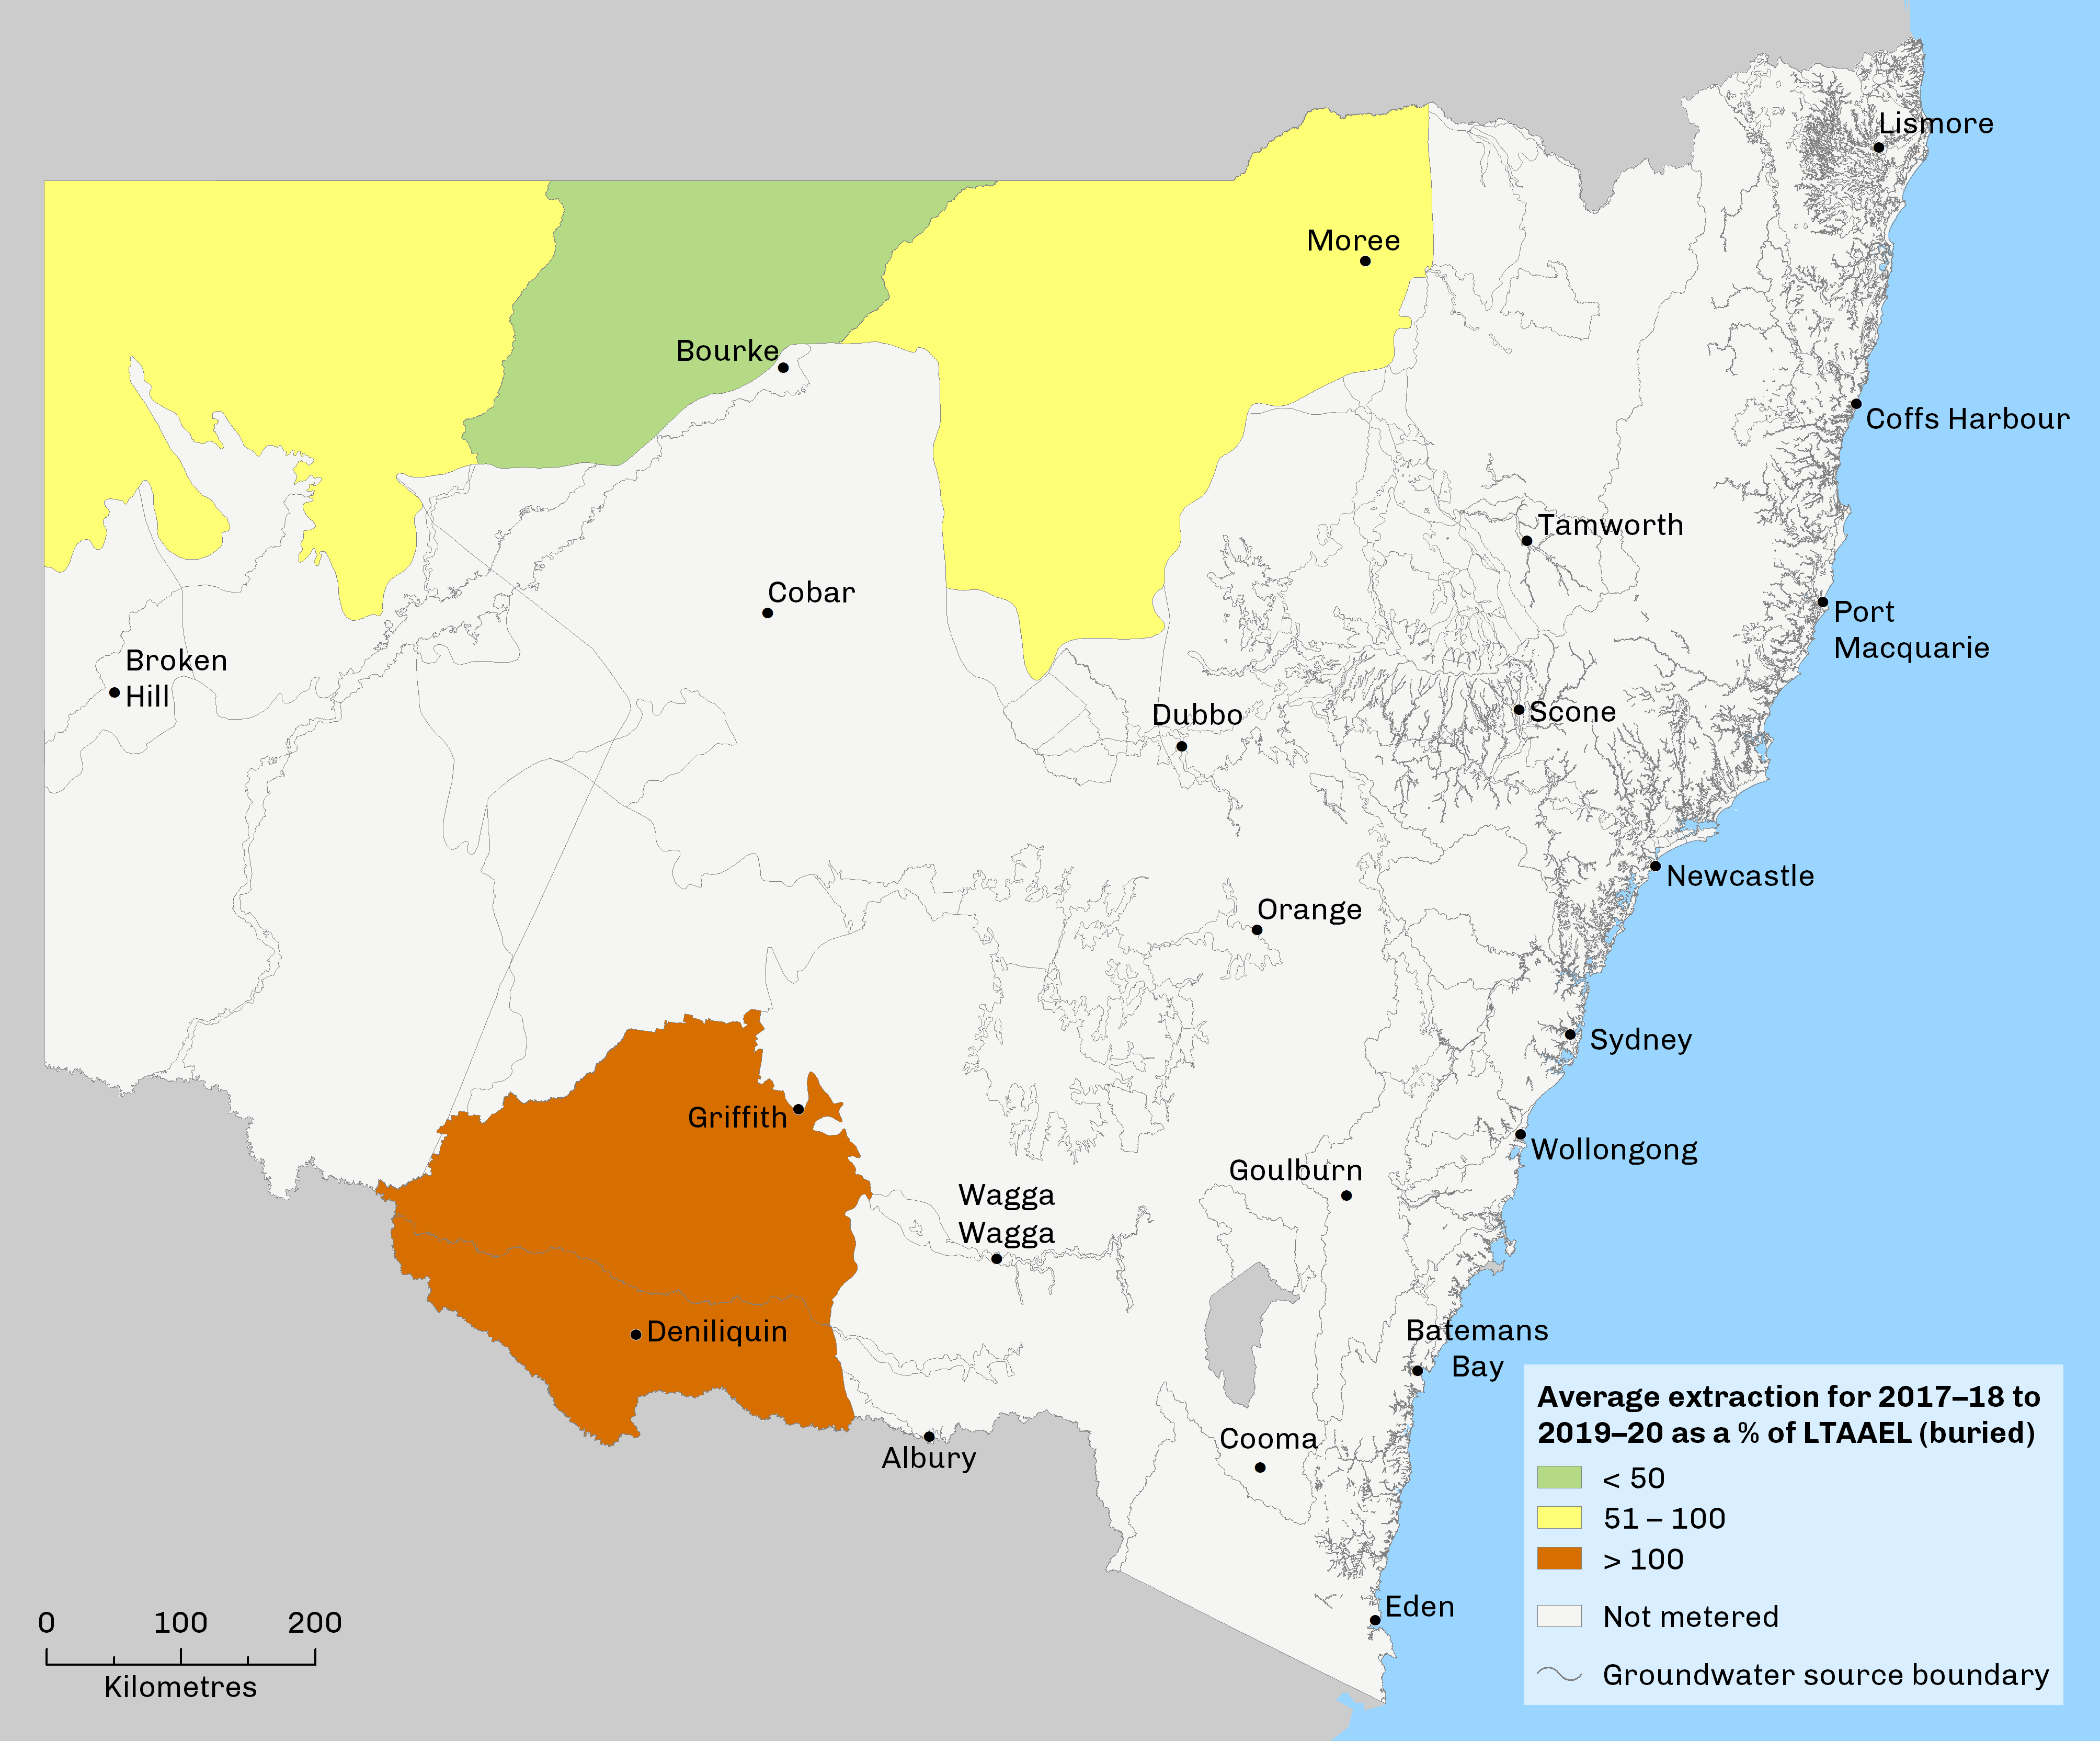 Map of NSW showing Extraction from buried groundwater sources as a percentage of the long-term average annual extraction limit 2016–17 to 2019–20